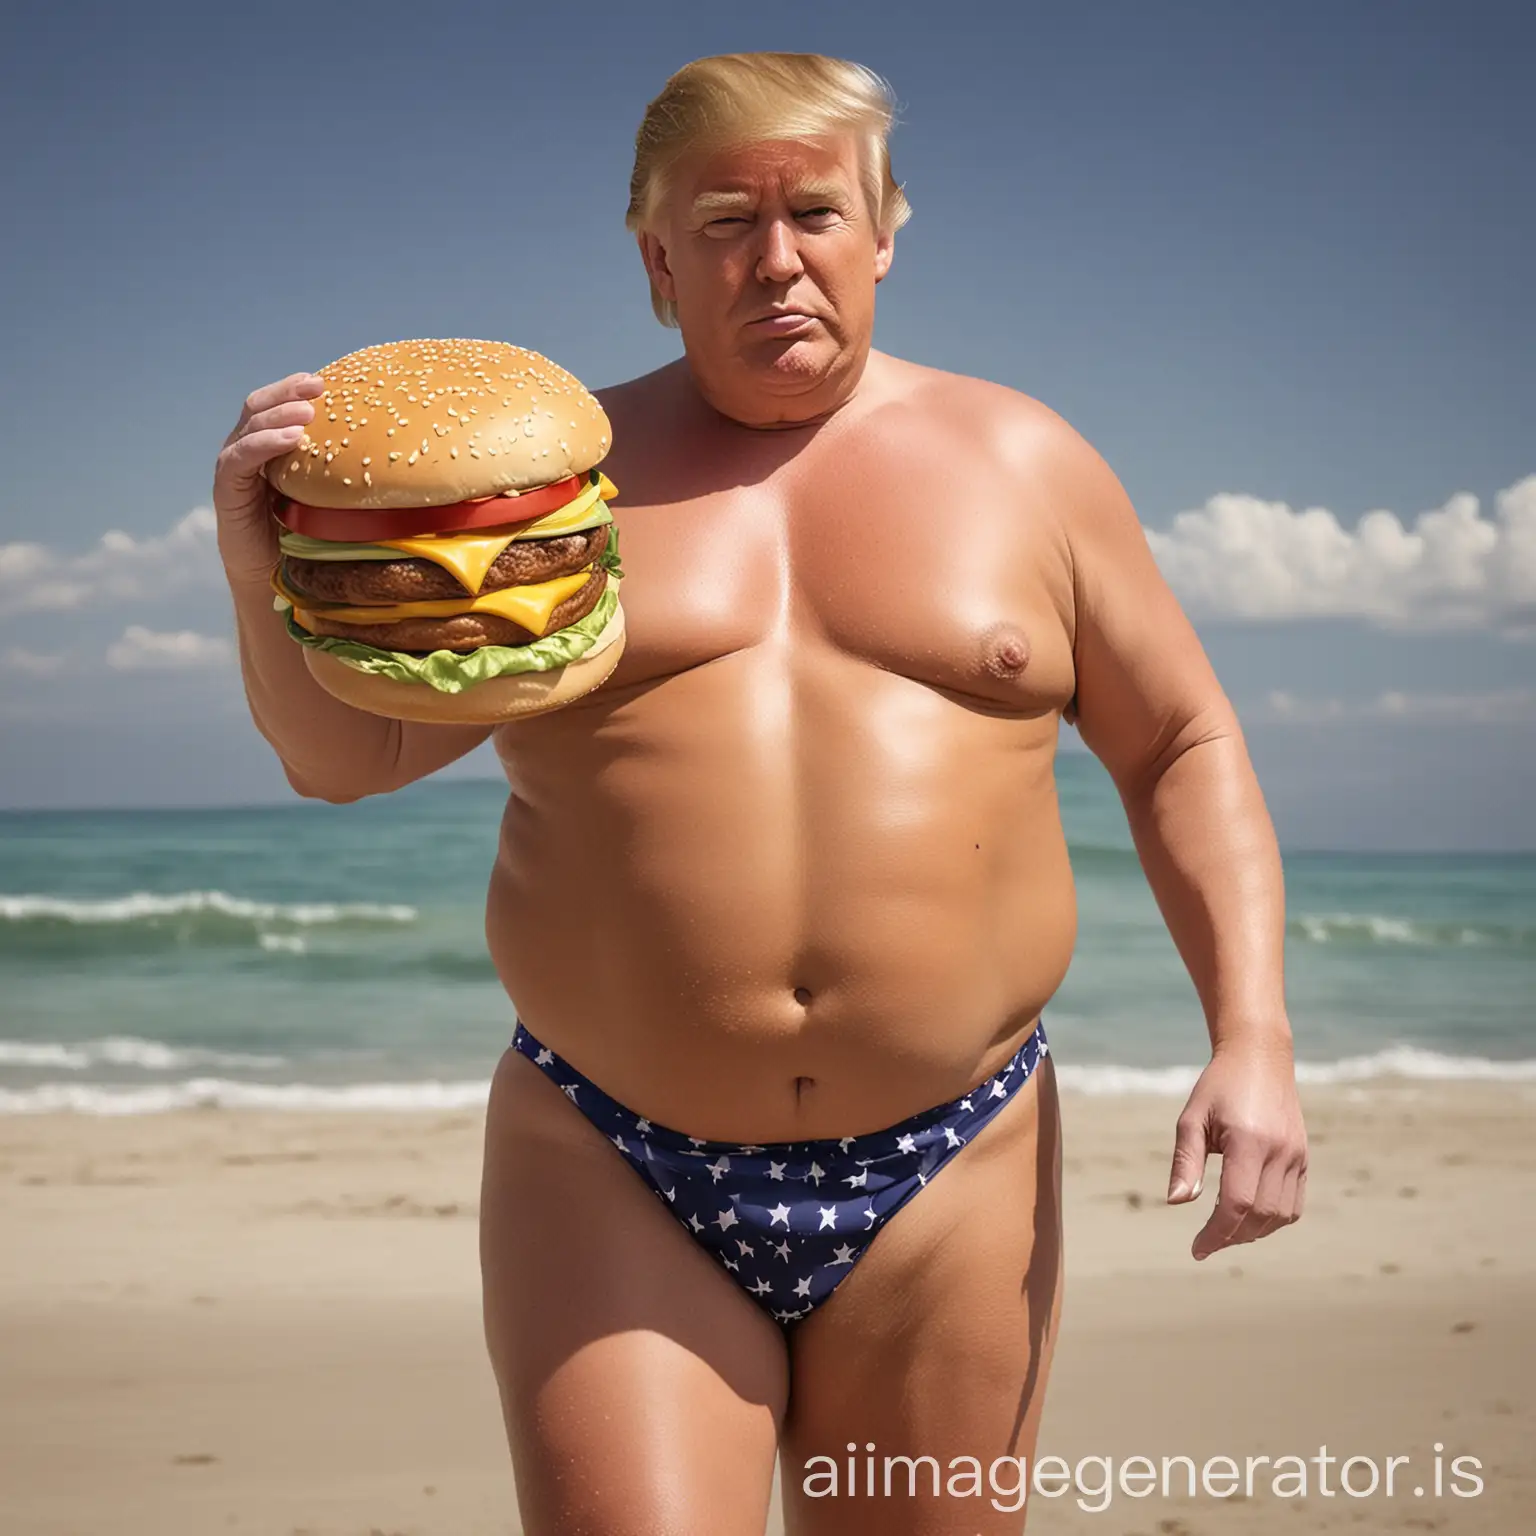 Create an image of donald trump. He is wearing swim suit. He has big belly. He is also carrying a macdonald cheese bruger